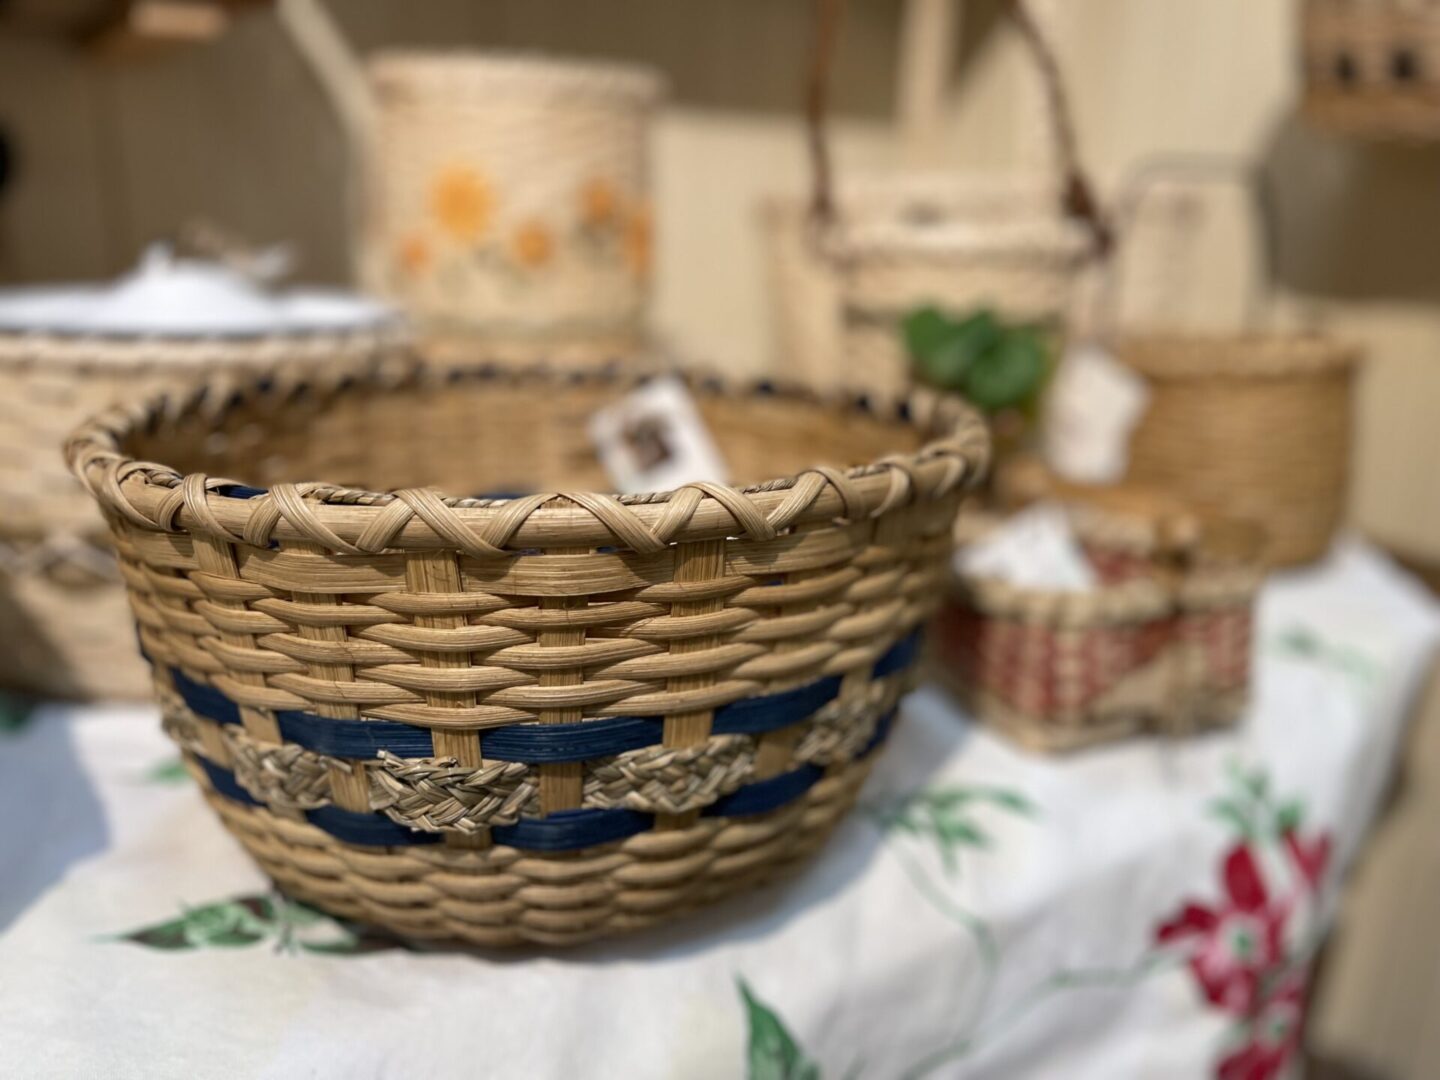 Baskets on a table next to a tablecloth.